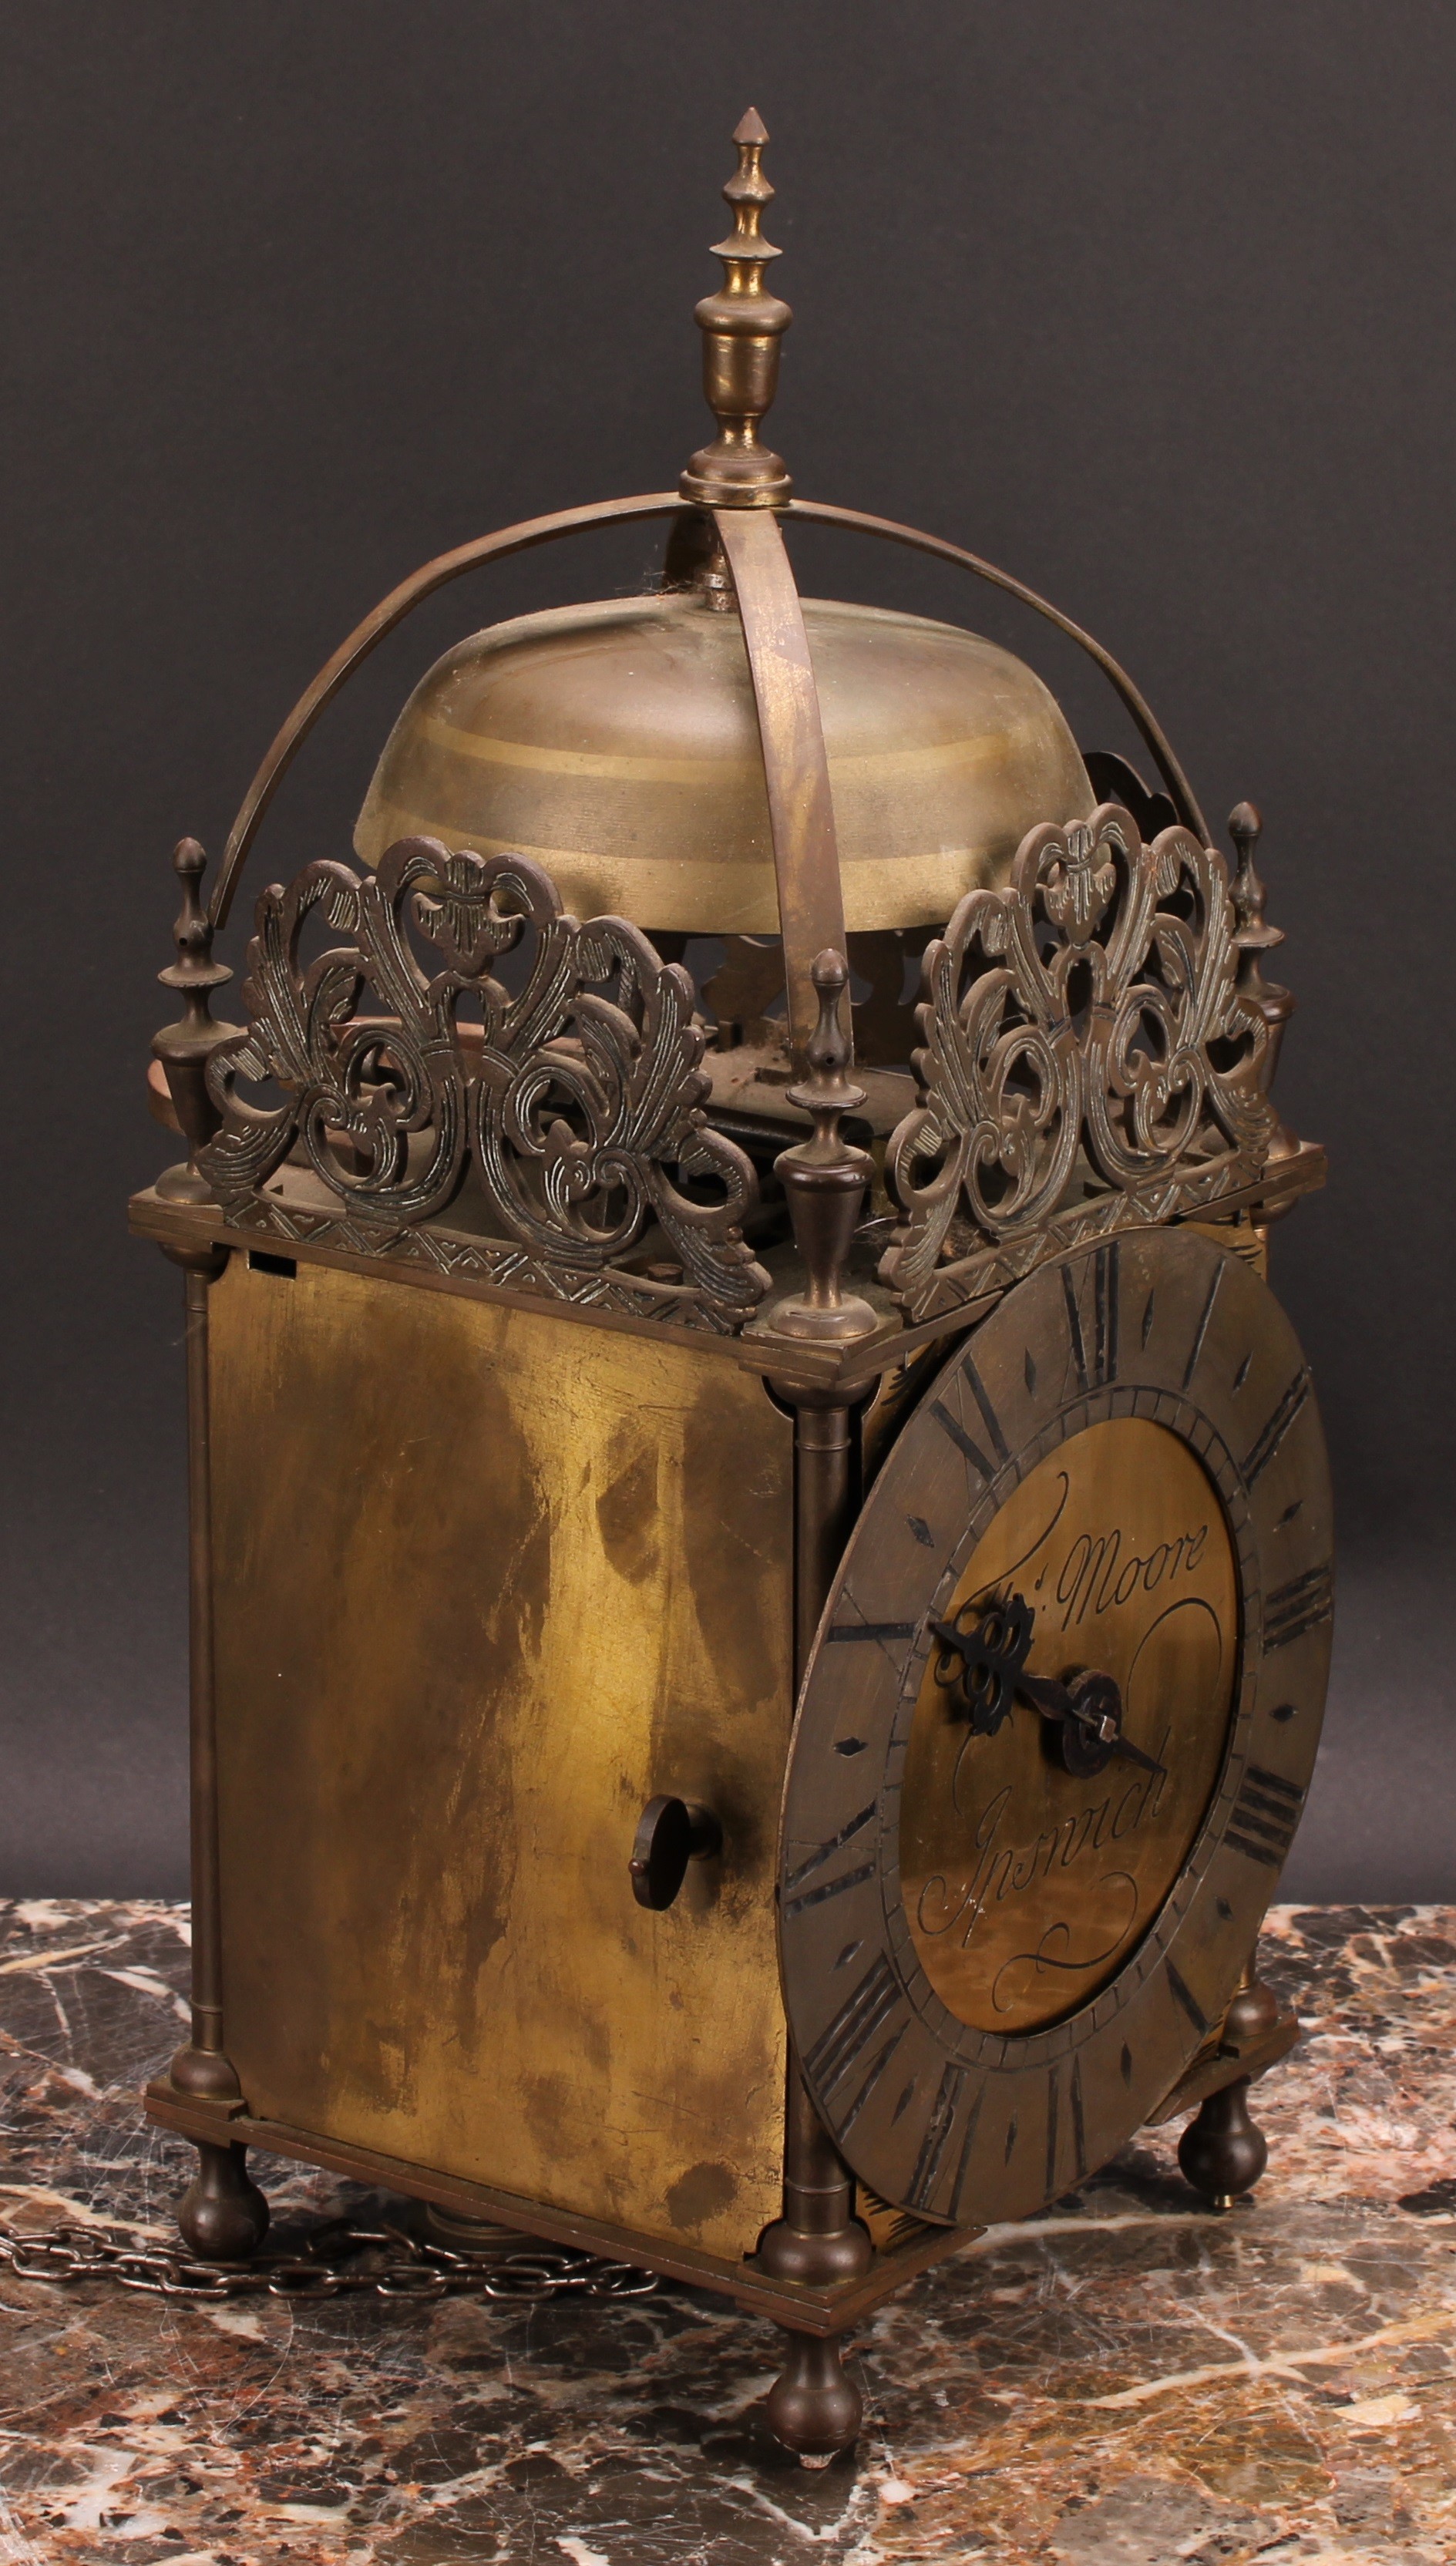 An early 18th century style brass lantern clock, 17cm dial inscribed Thomas Moore, Ipswich, Roman - Image 2 of 5